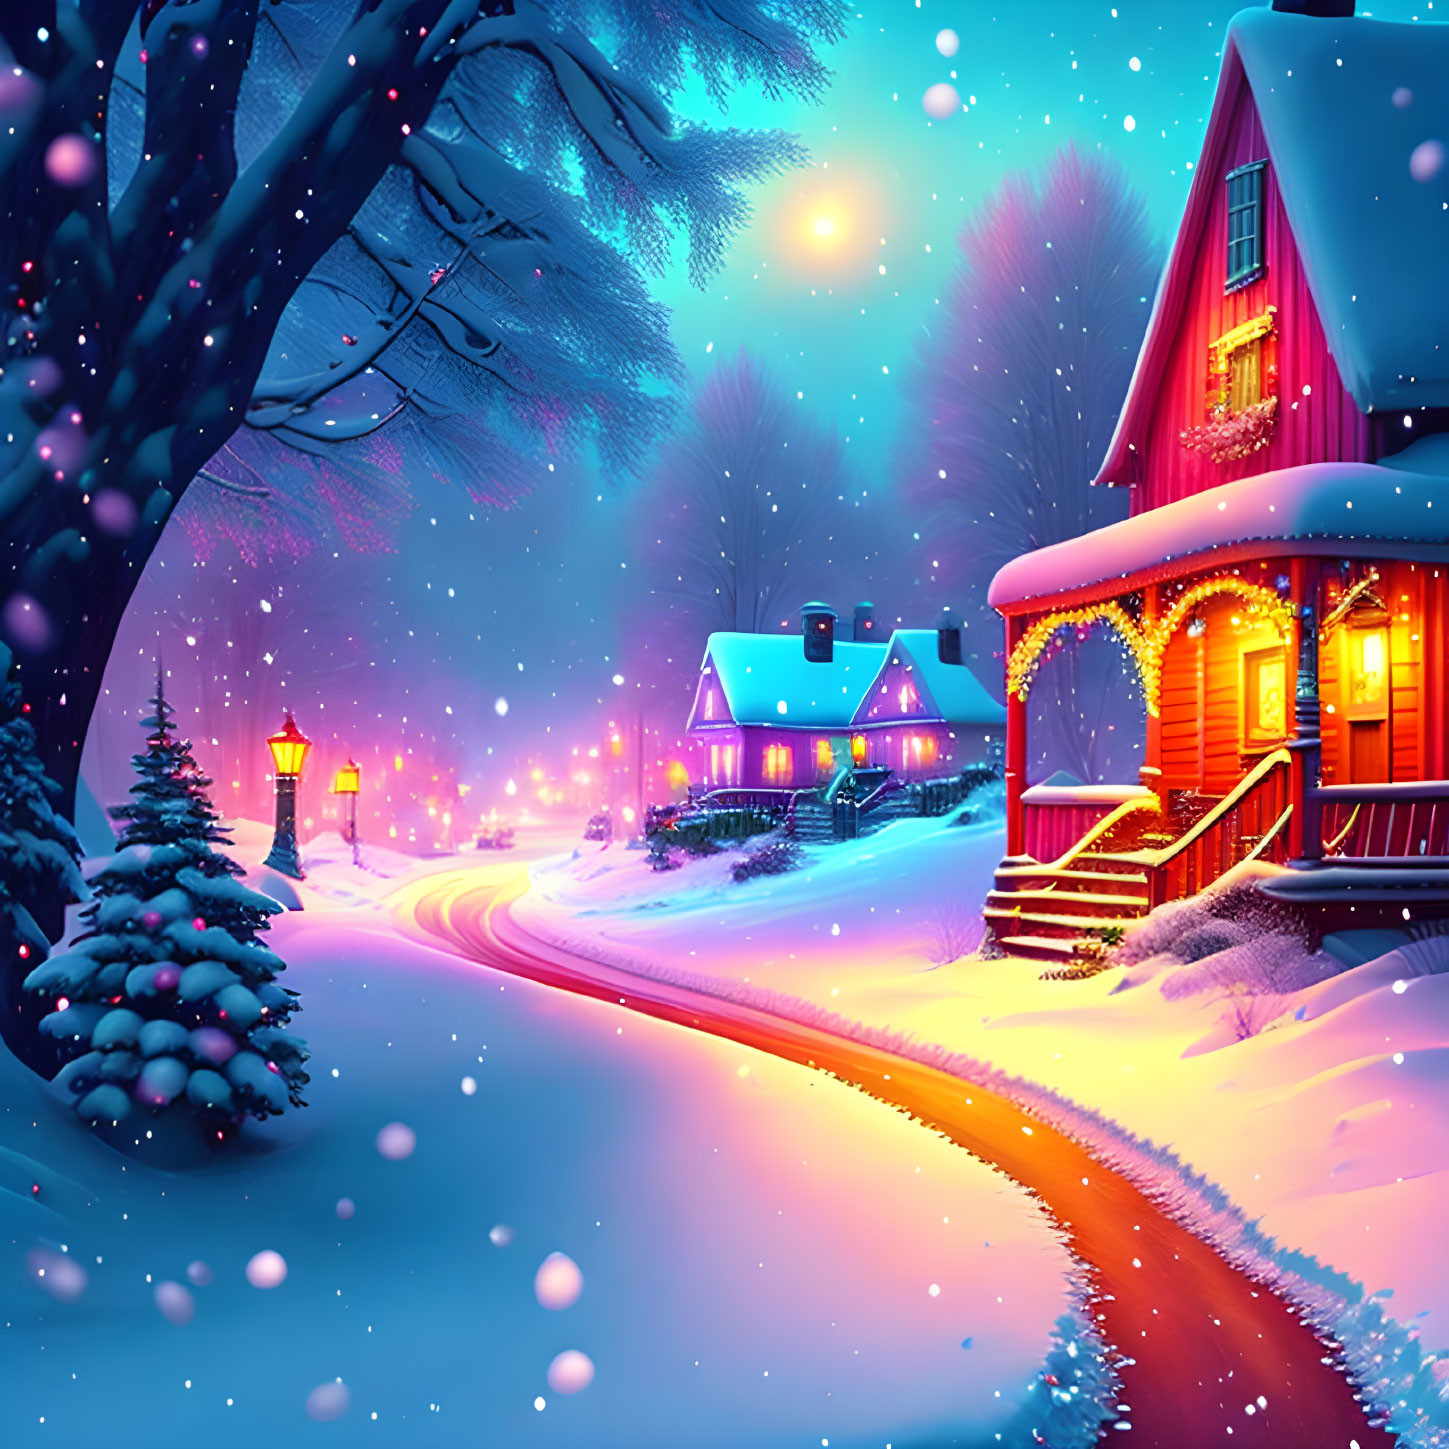 Snowy Winter Village with Cozy Houses and Snowy Path